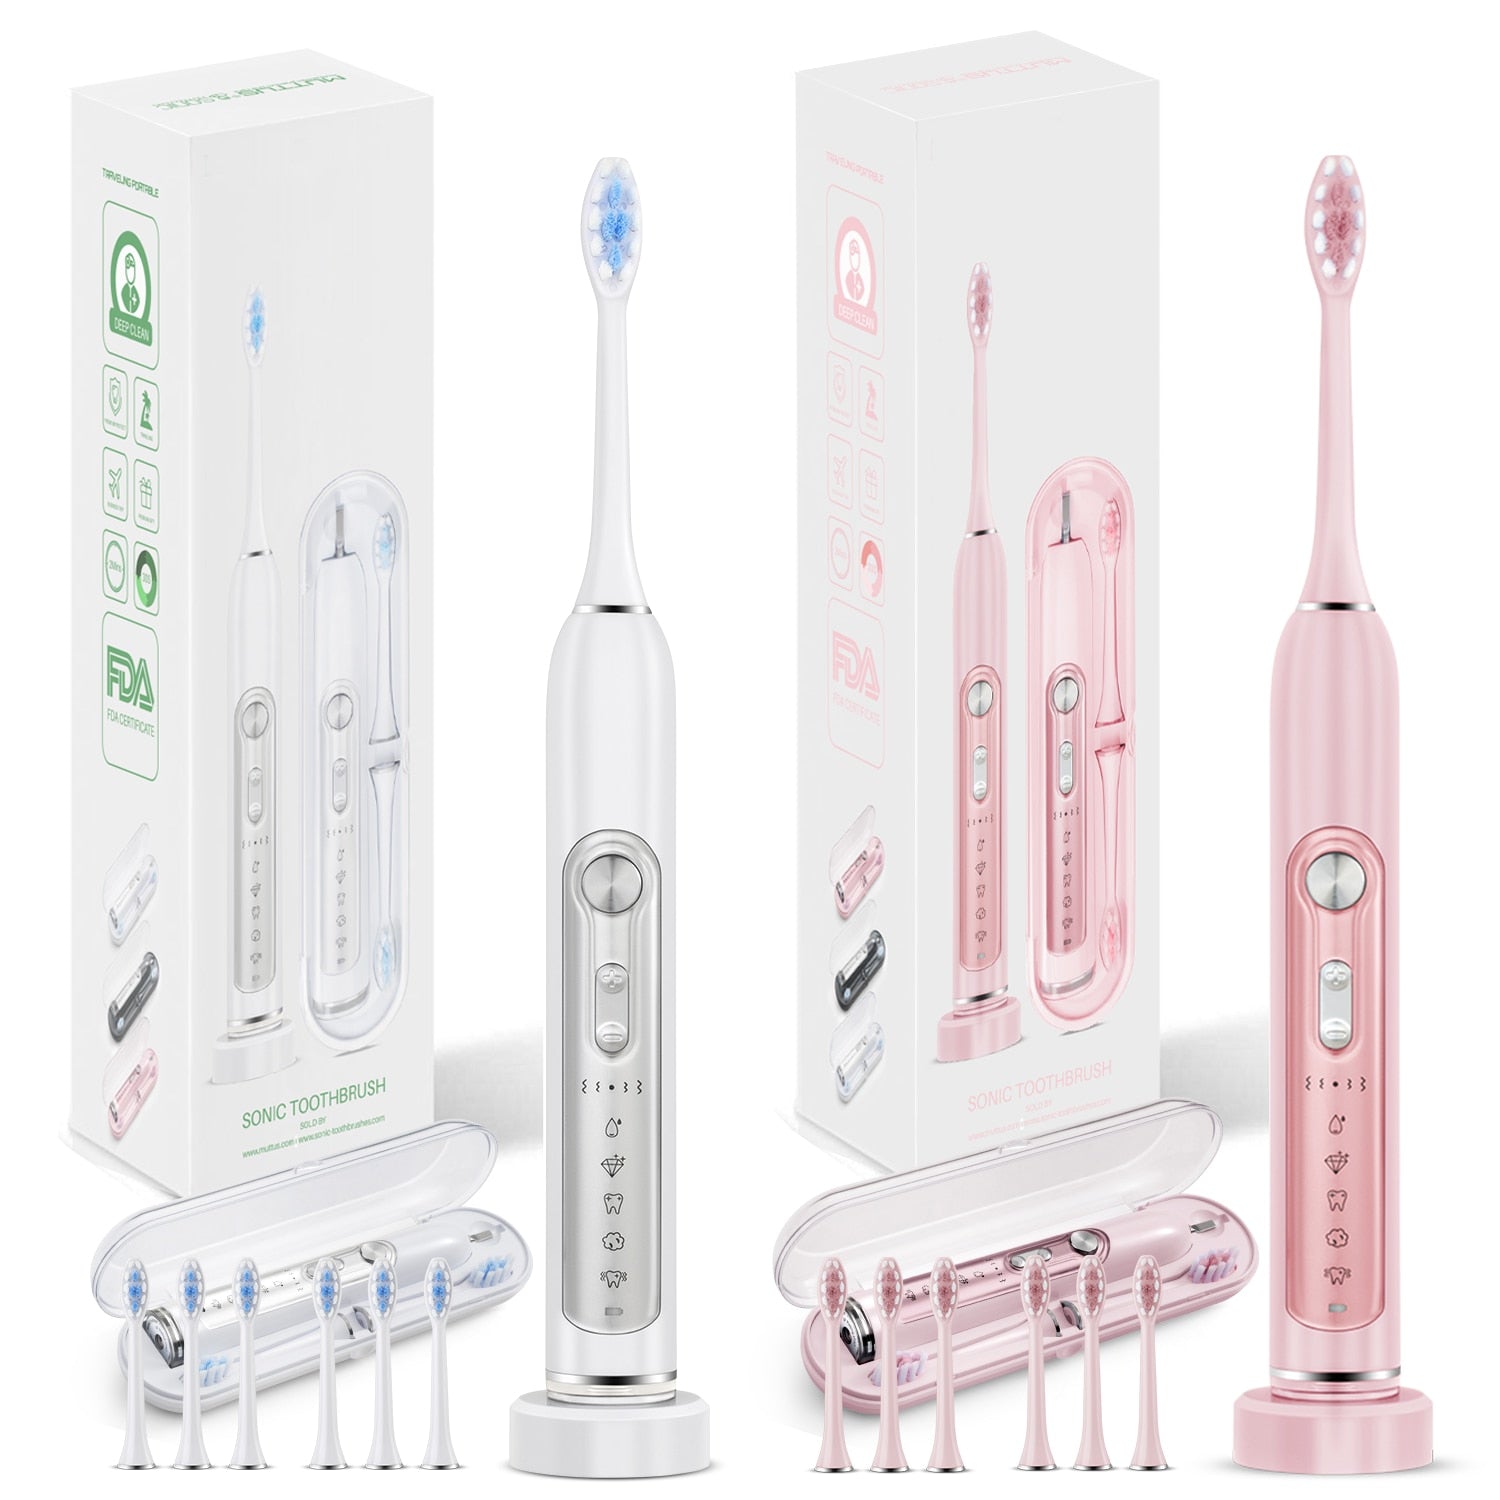 SUBORT Super Sonic Electric Toothbrushes for Adults and Kids - peacefulpluslounge